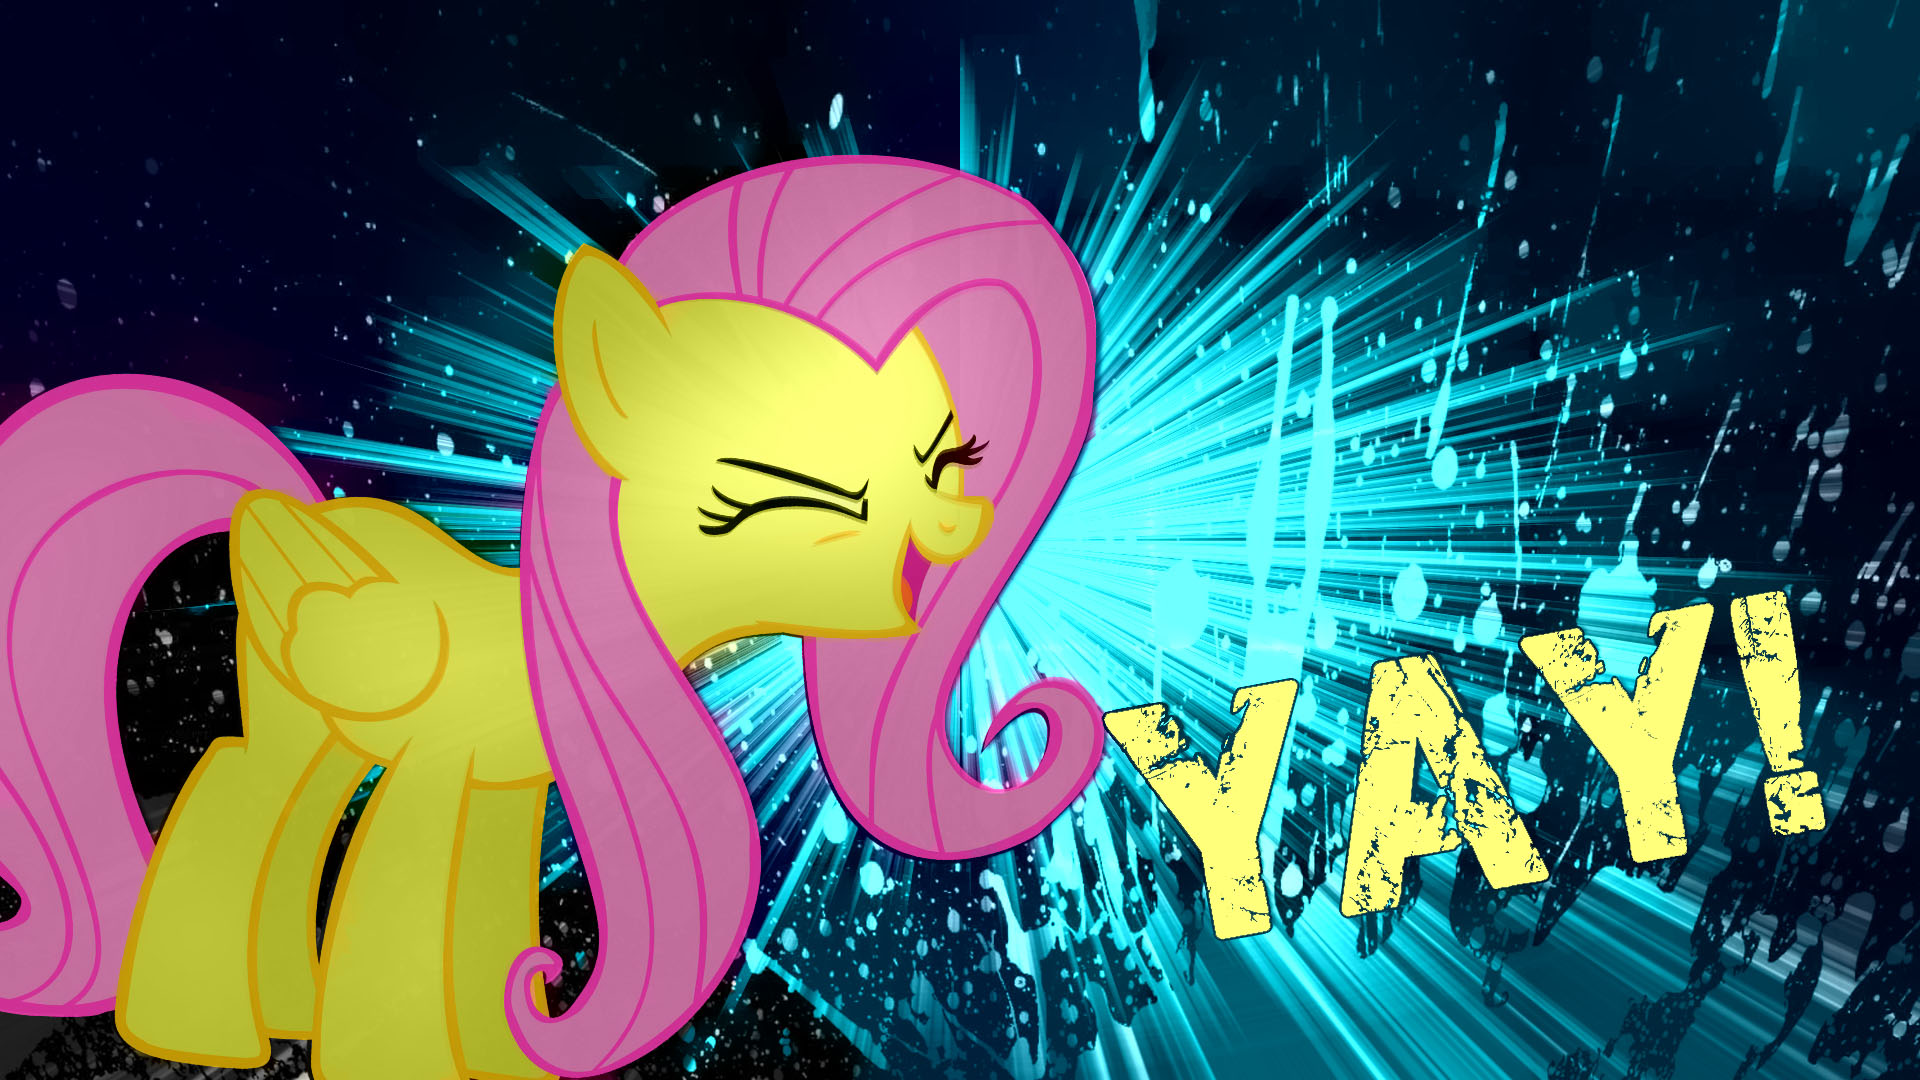 Fluttershy Yay Wallpaper (Recolored) by Tarindel, TheFlutterKnight and TygerxL